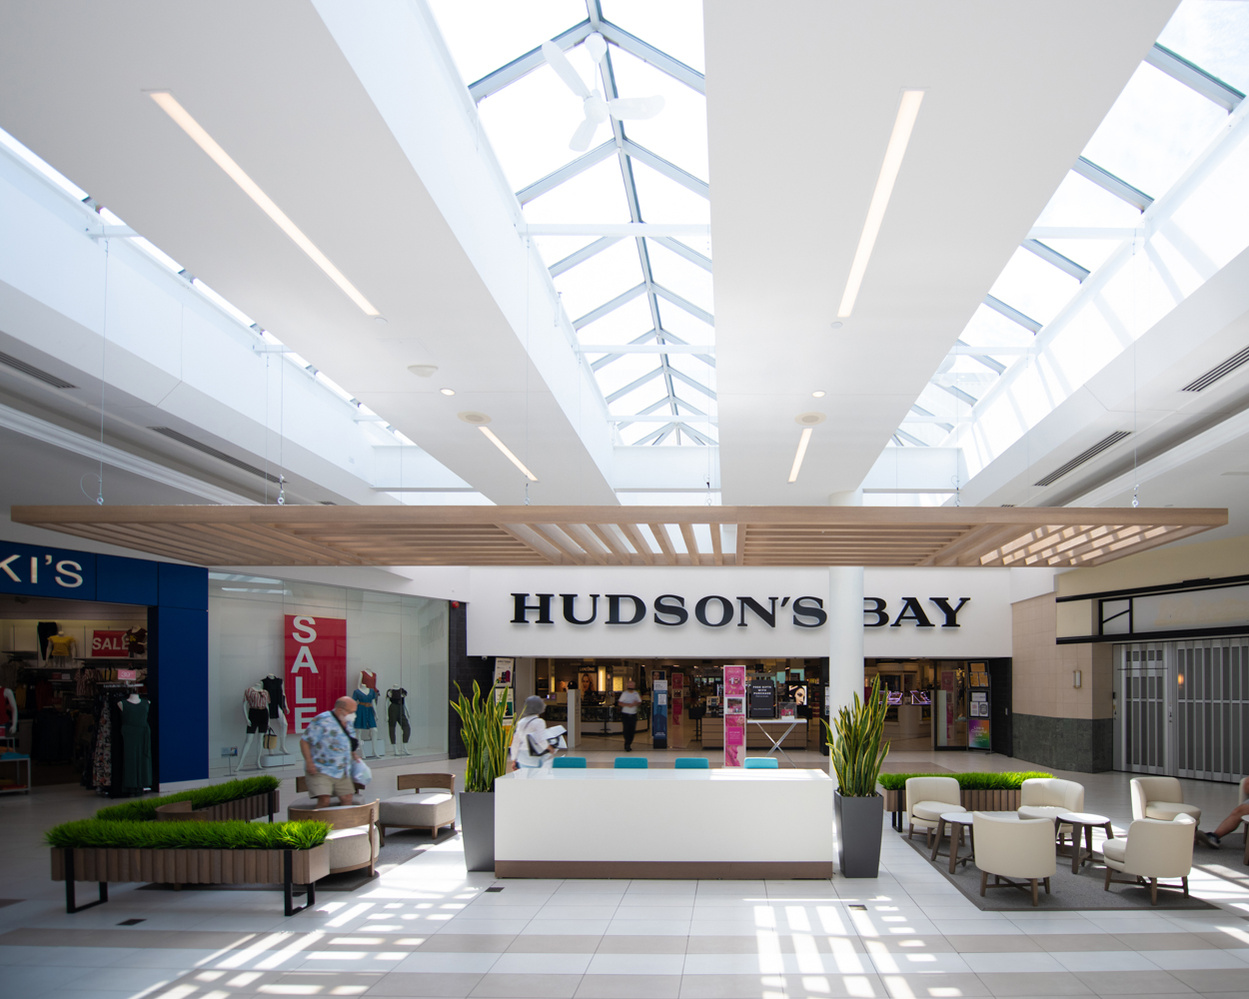 White Oaks Mall London Ontario by Frank Fenn IDEA3 Photography interior features and Hudsons Bay